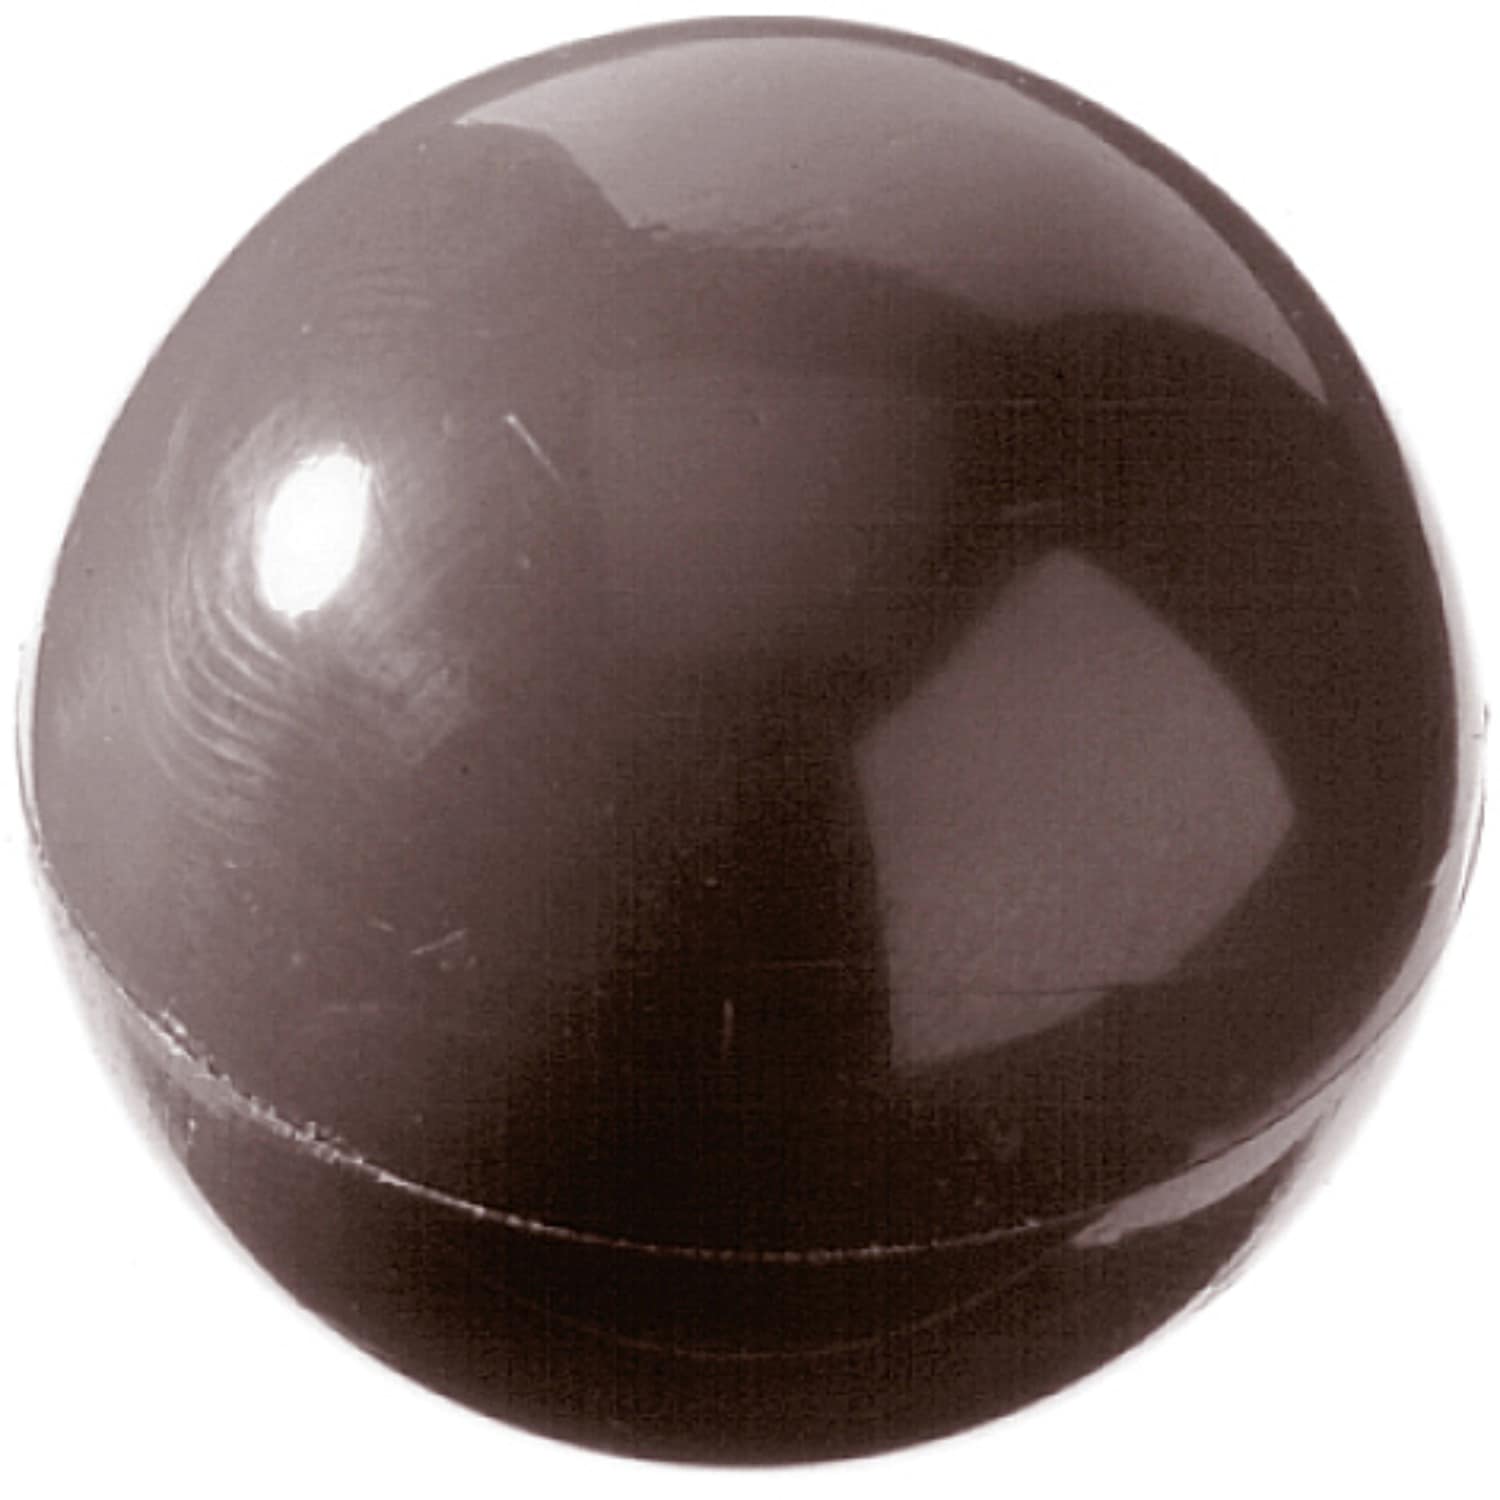 Chocolate mould "Sphere" 421258